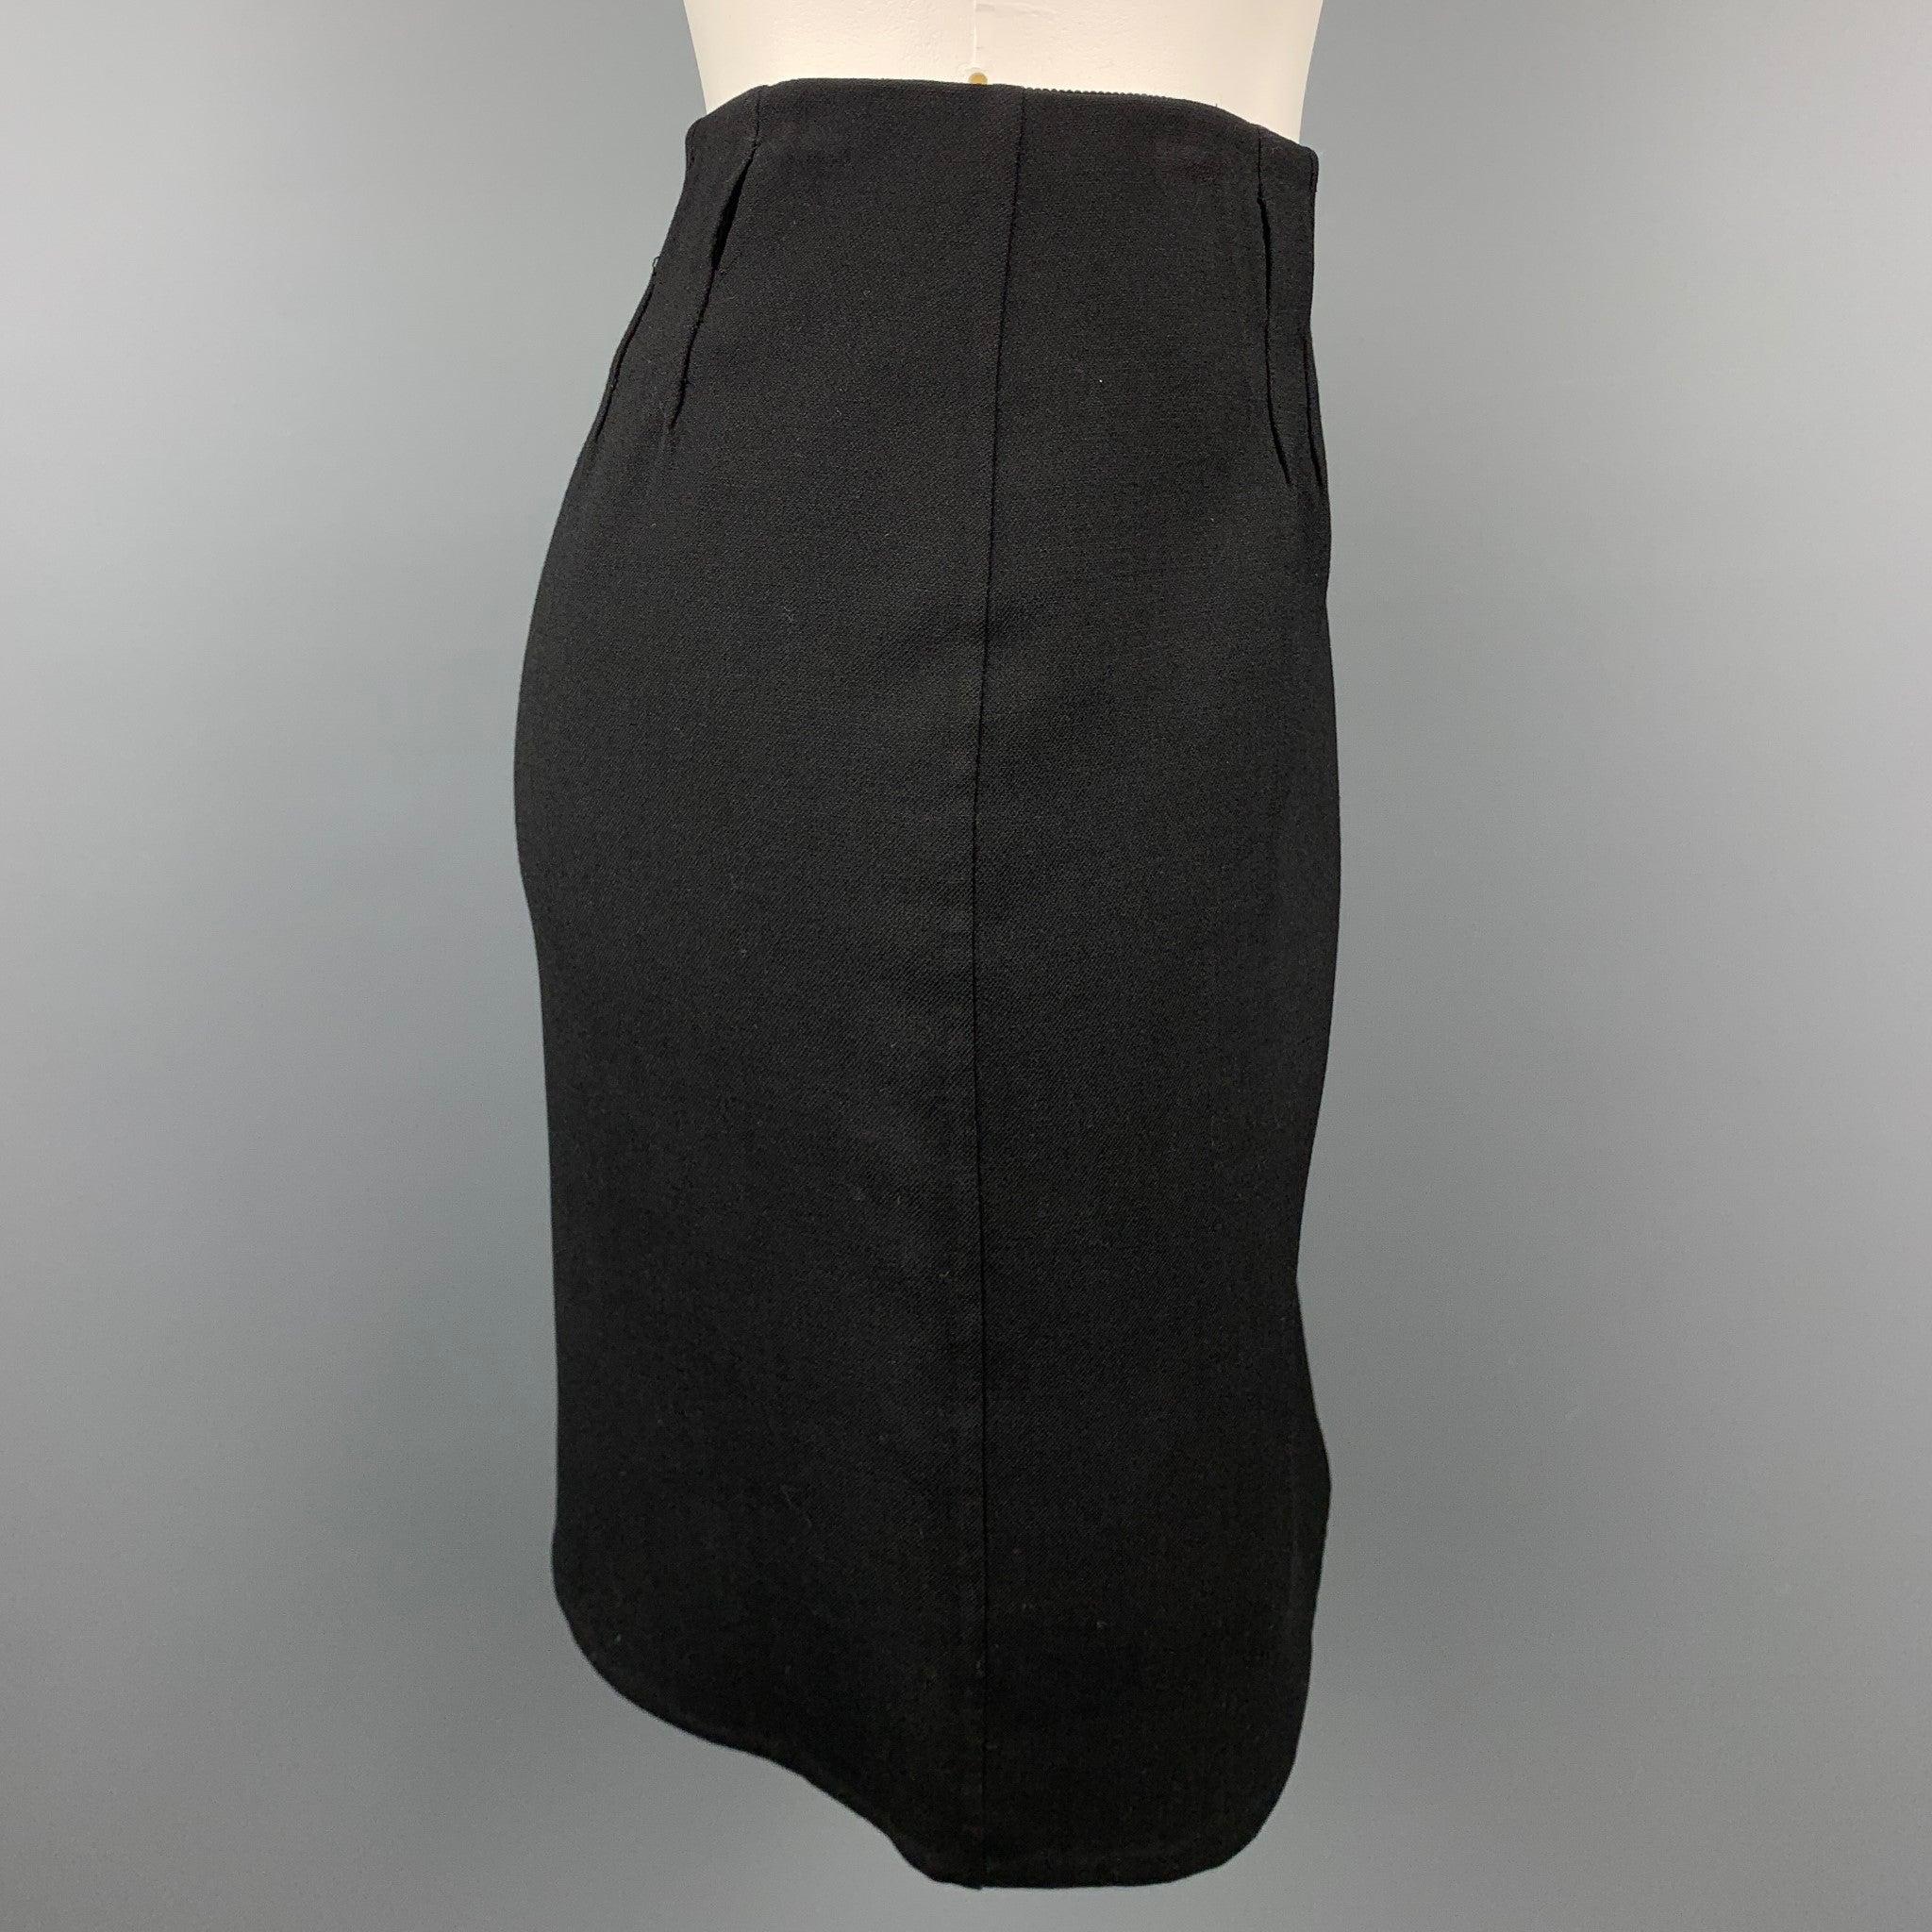 RALPH LAUREN COLLECTION skirt comes in a black twill wool blend featuring a pencil style, pleated, and a back zip up closure.
Made in USA.Very Good
Pre-Owned Condition. 

Marked:   4 

Measurements: 
  Waist: 28 inches 
Hip: 38 inches 
Length: 18